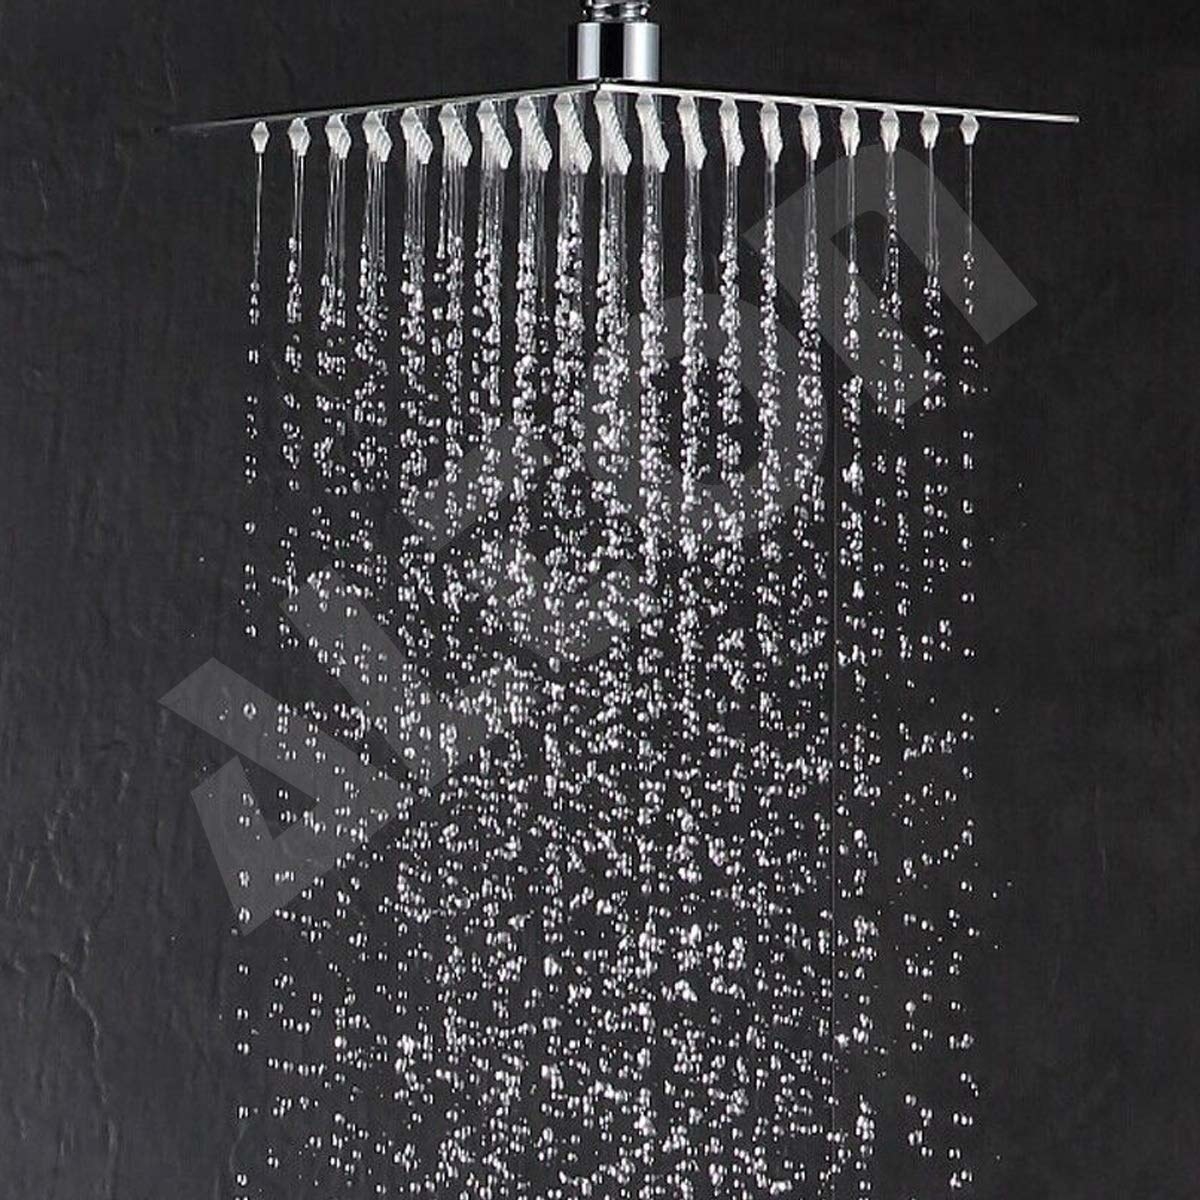 Water dripping out the shower